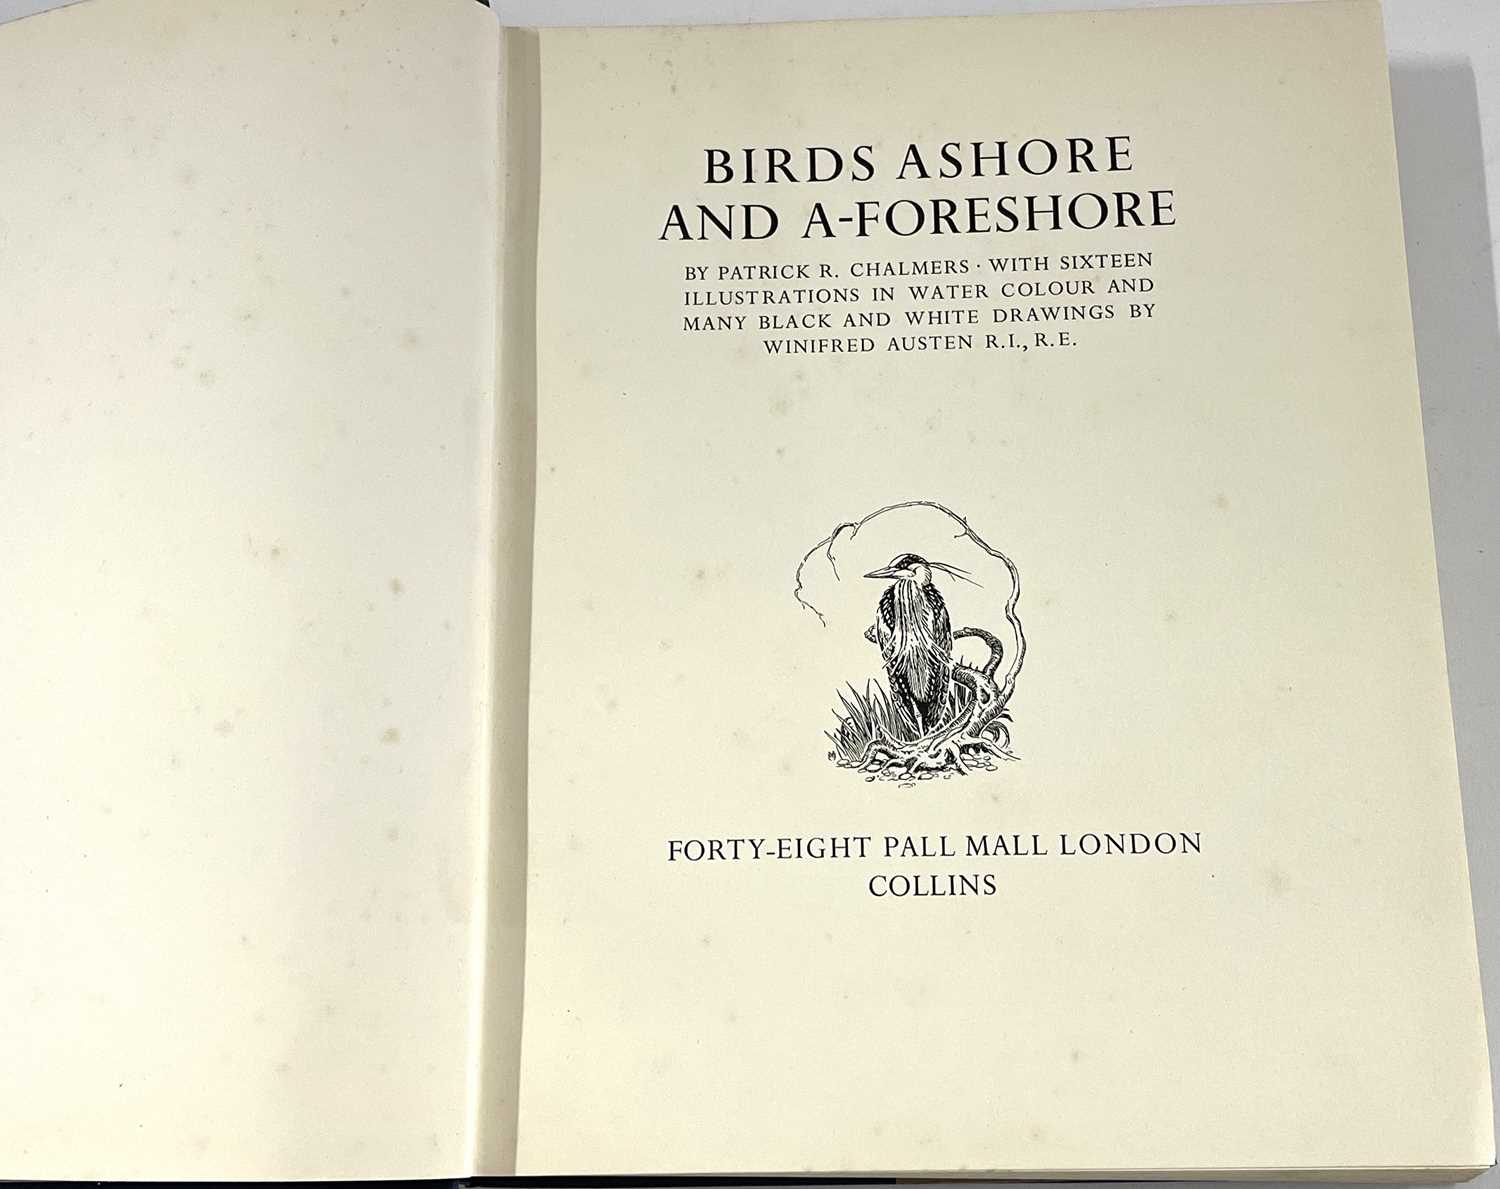 Small box containing bird books including Birds Ashore and Aforeshore by Patrick Chalmers, - Image 11 of 14